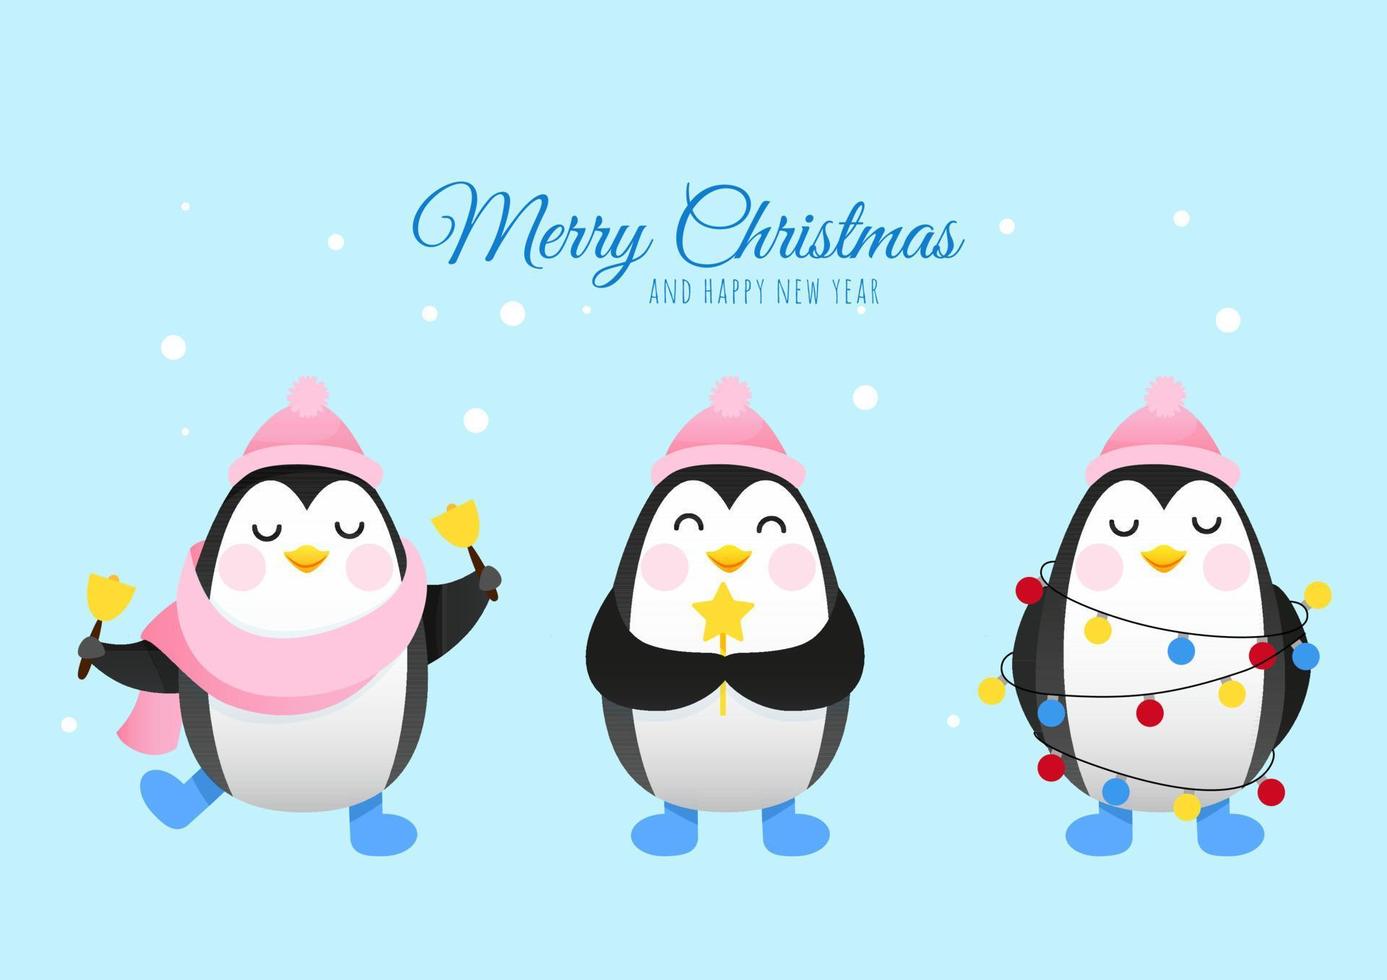 Three cute penguins with a New Year's garland wish Merry Christmas vector